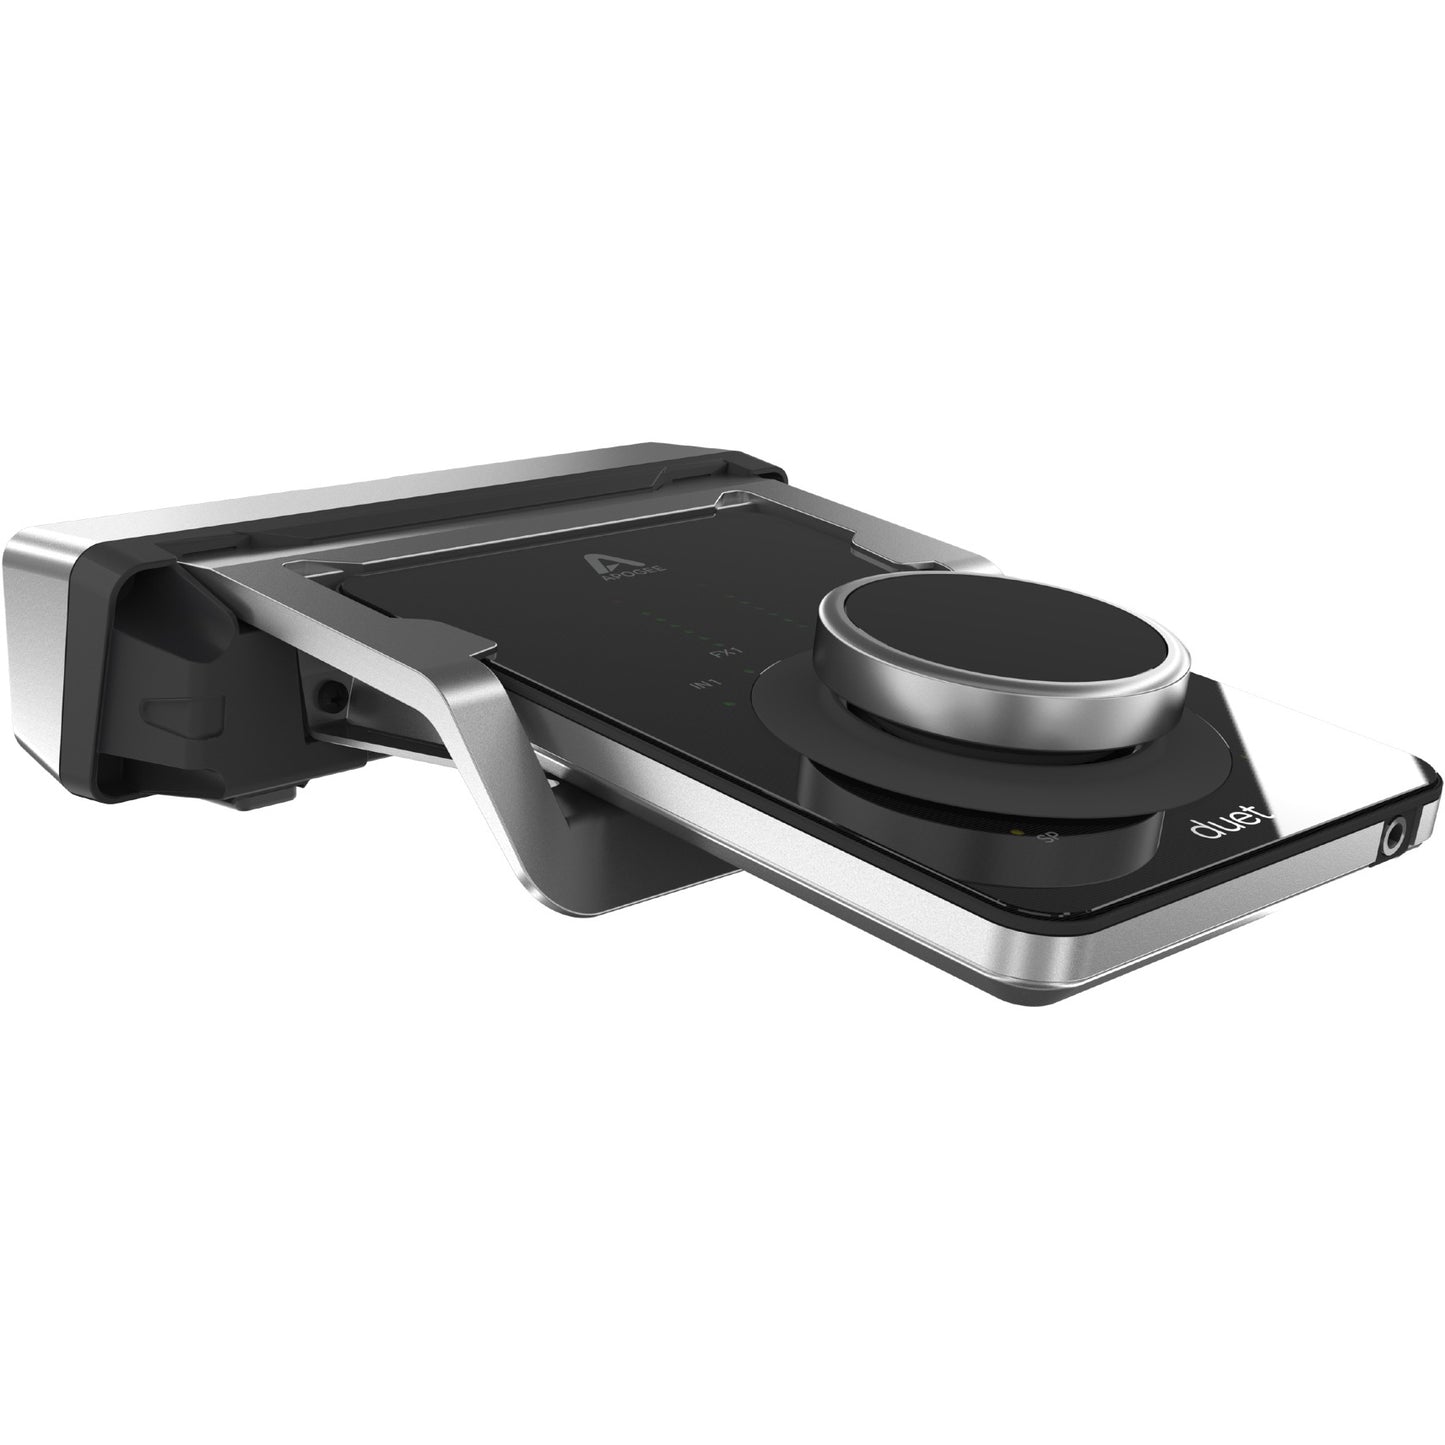 Apogee Duet Dock Docking Station for Duet 3